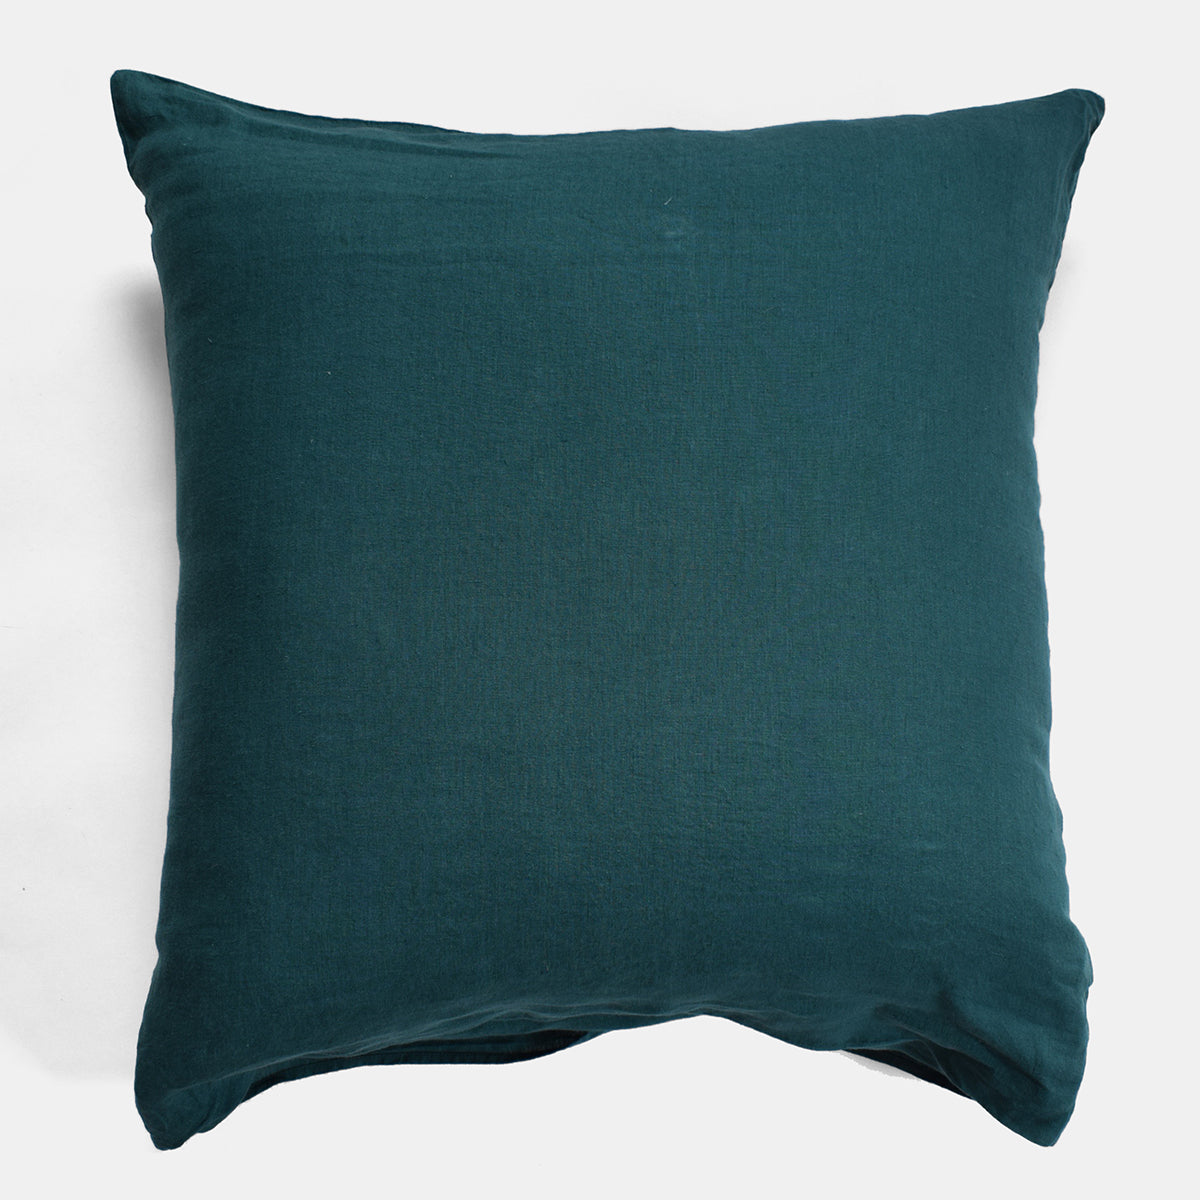 Linge Particulier Vintage Green Euro Linen Pillowcase Sham for a colorful linen bedding look in deep teal green - Collyer's Mansion